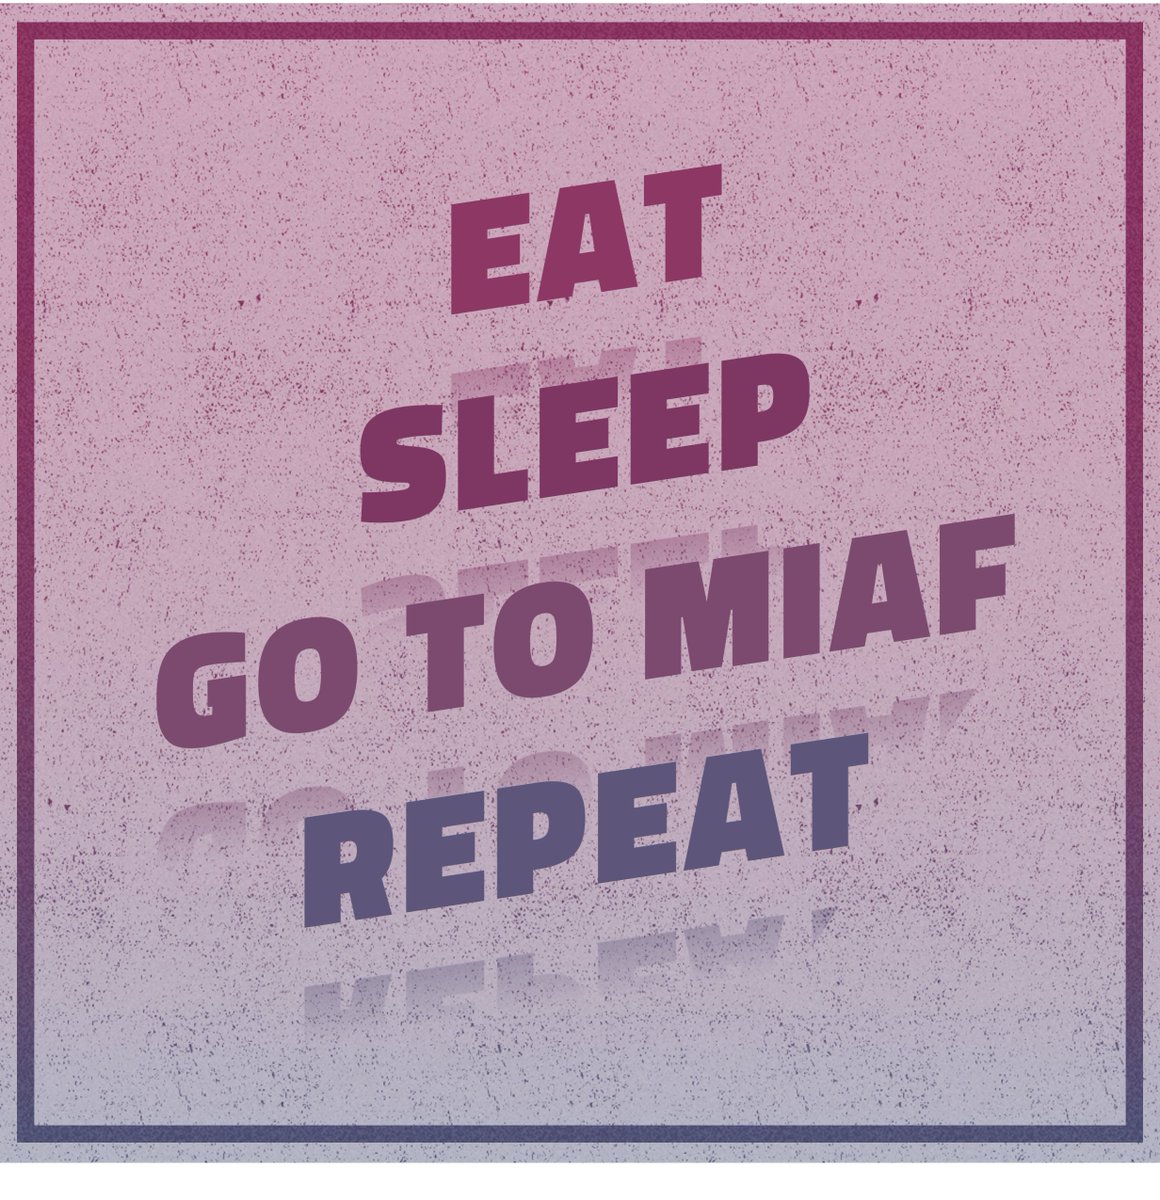 We caught a serious case of 'animation fever' at MIAF! 😂

🎬We're halfway through MIAF and living by the motto: eat, sleep, go to MIAF, repeat!
Who needs anything else in life when you've got animation magic on repeat?
miaf.net

#MIAF2024 #MIAF #AnimatedArt